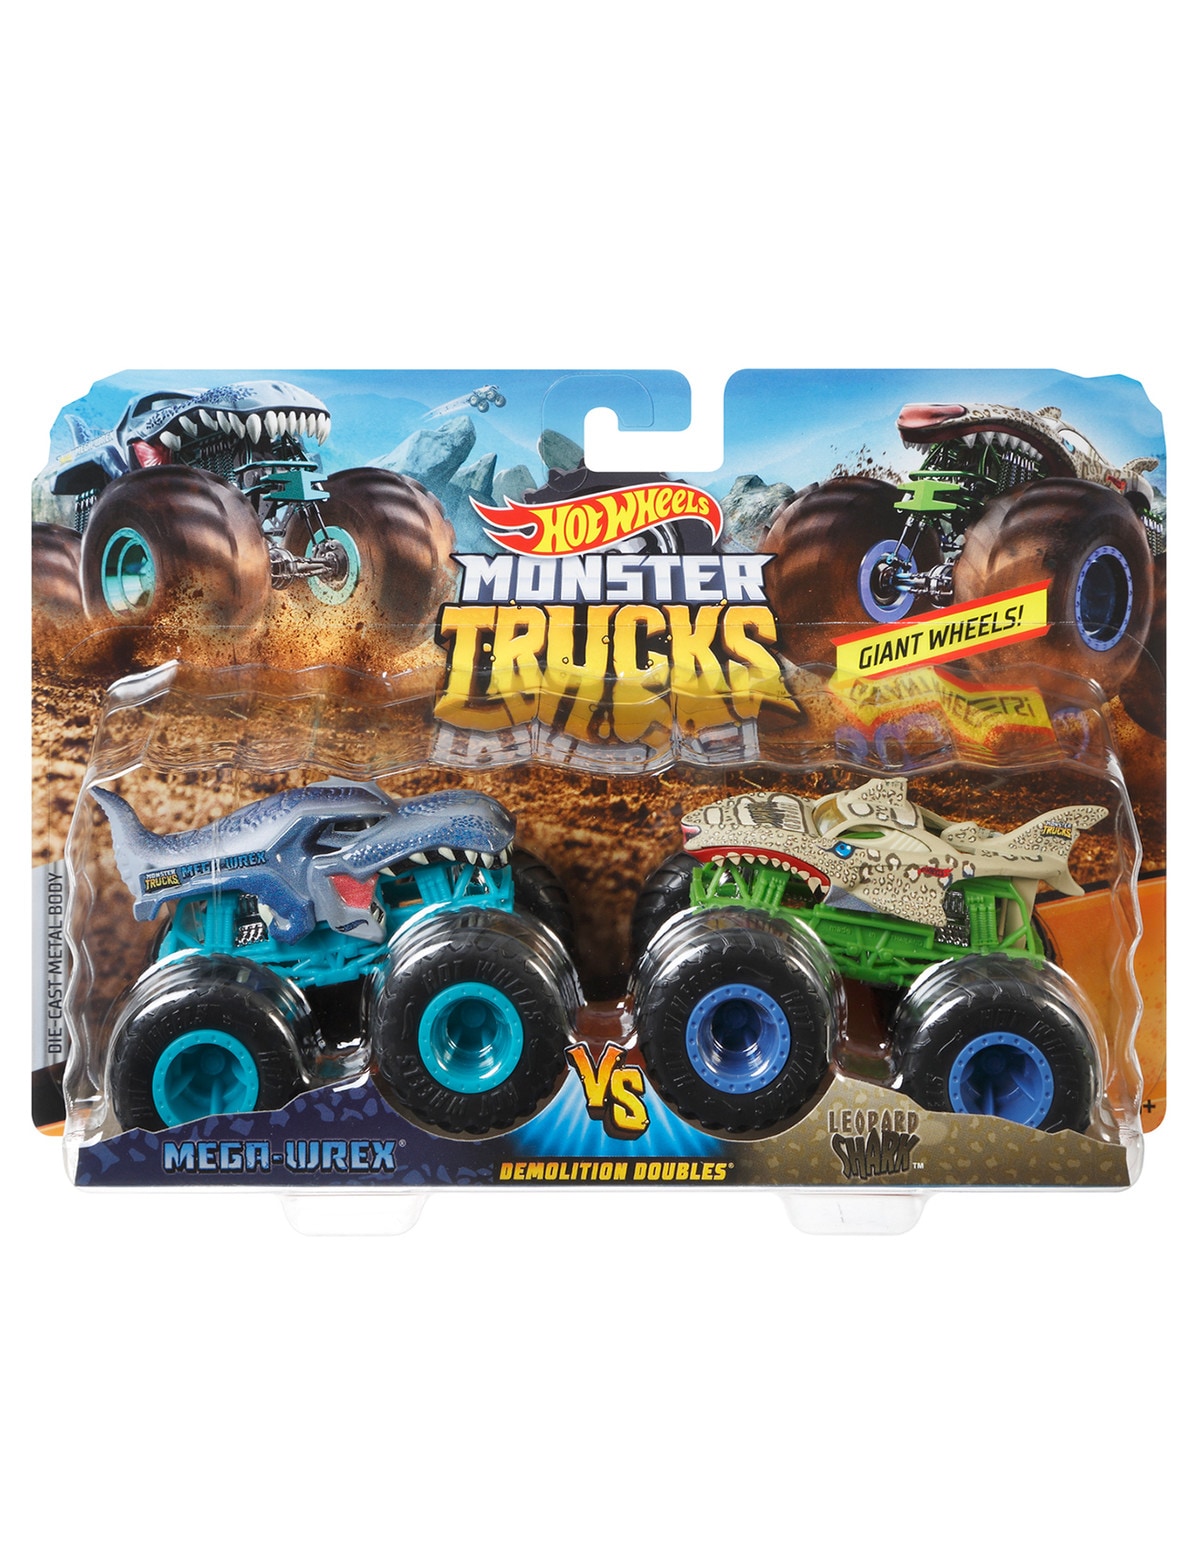 Hot Wheels Monster Trucks 1:64 Scale Lion's Share, Includes Hot